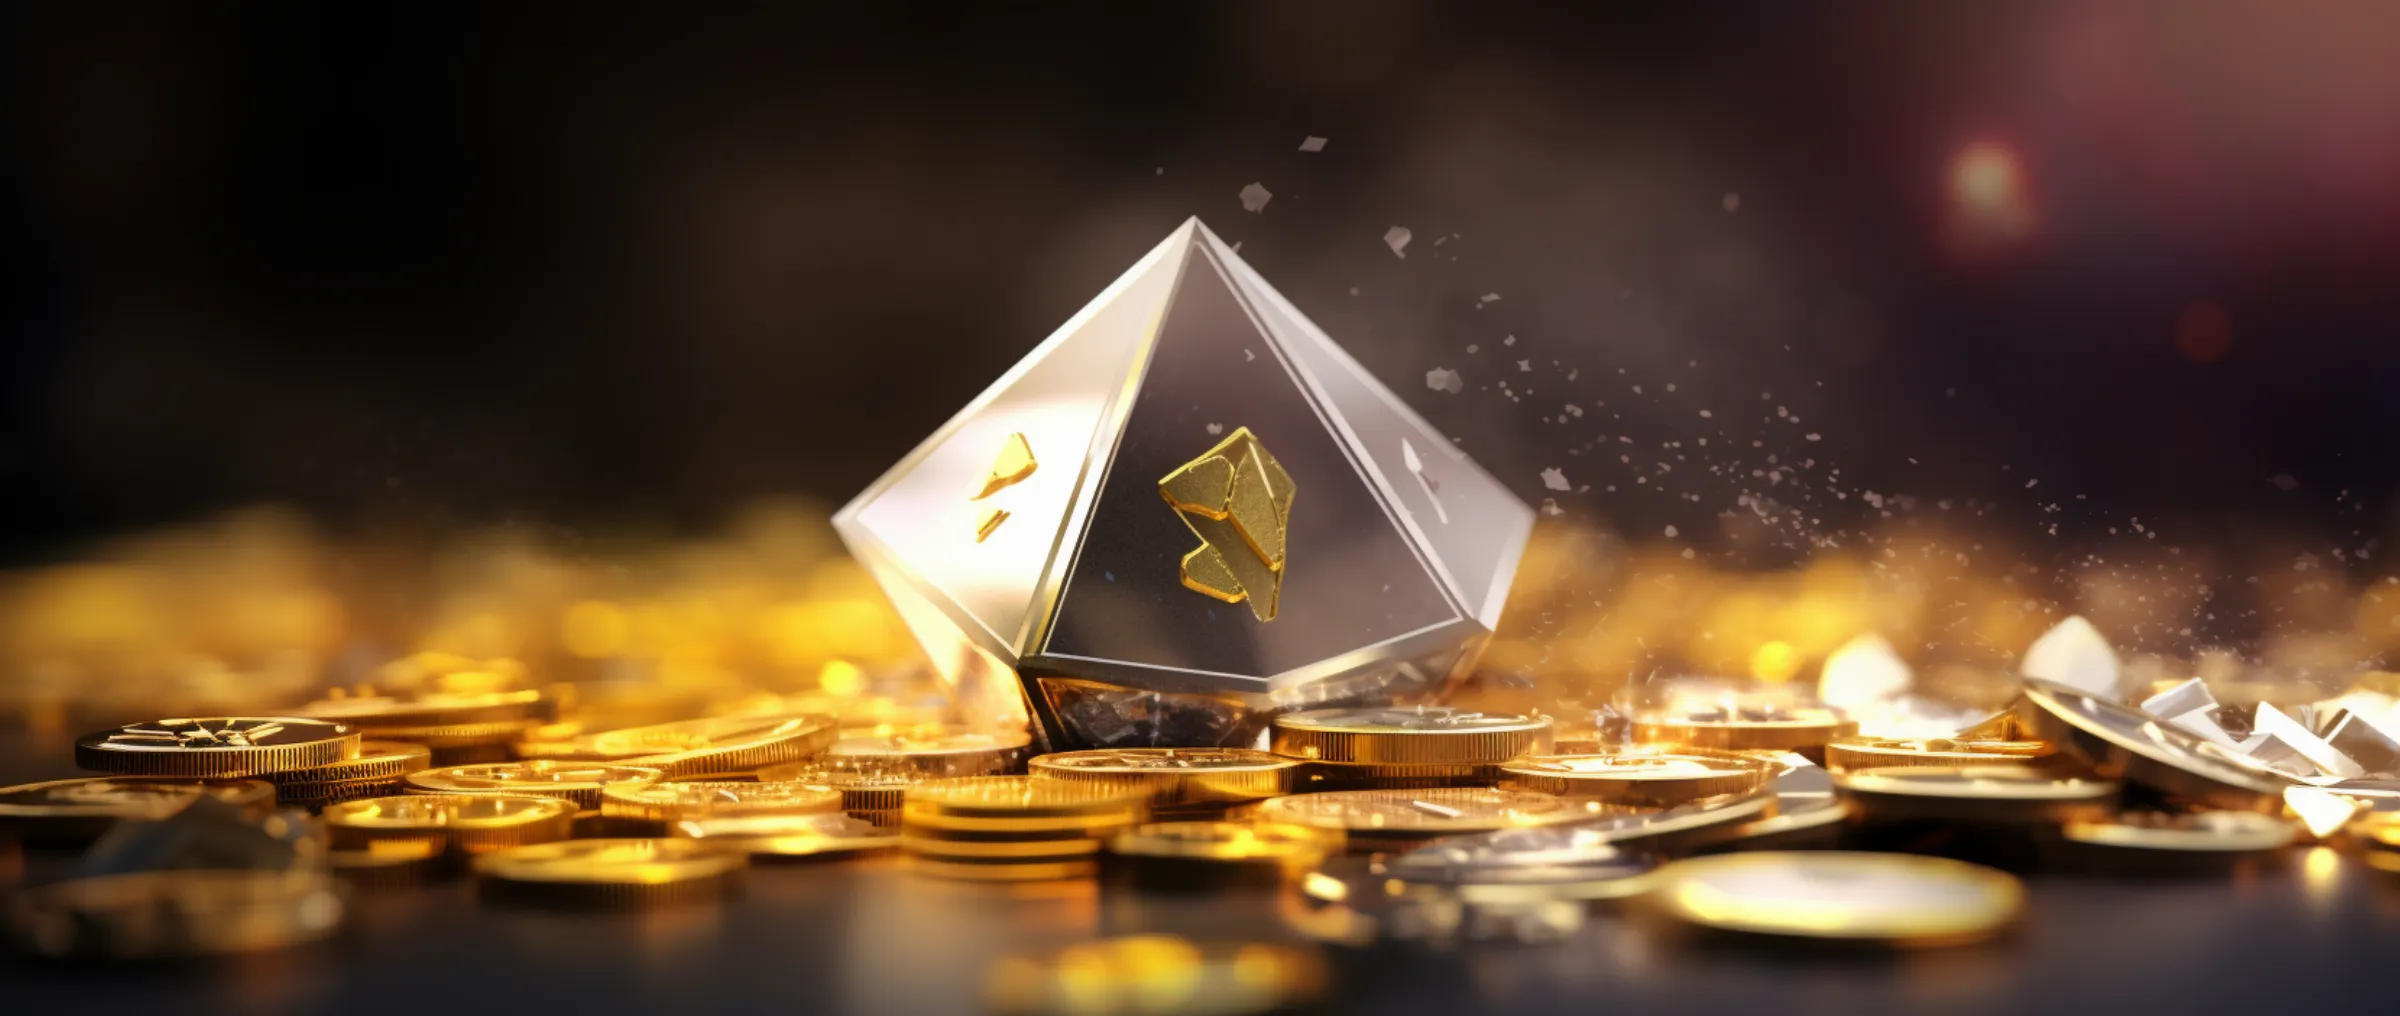 The Ethereum price fell after the transfer of 11,200 ETH to Binance